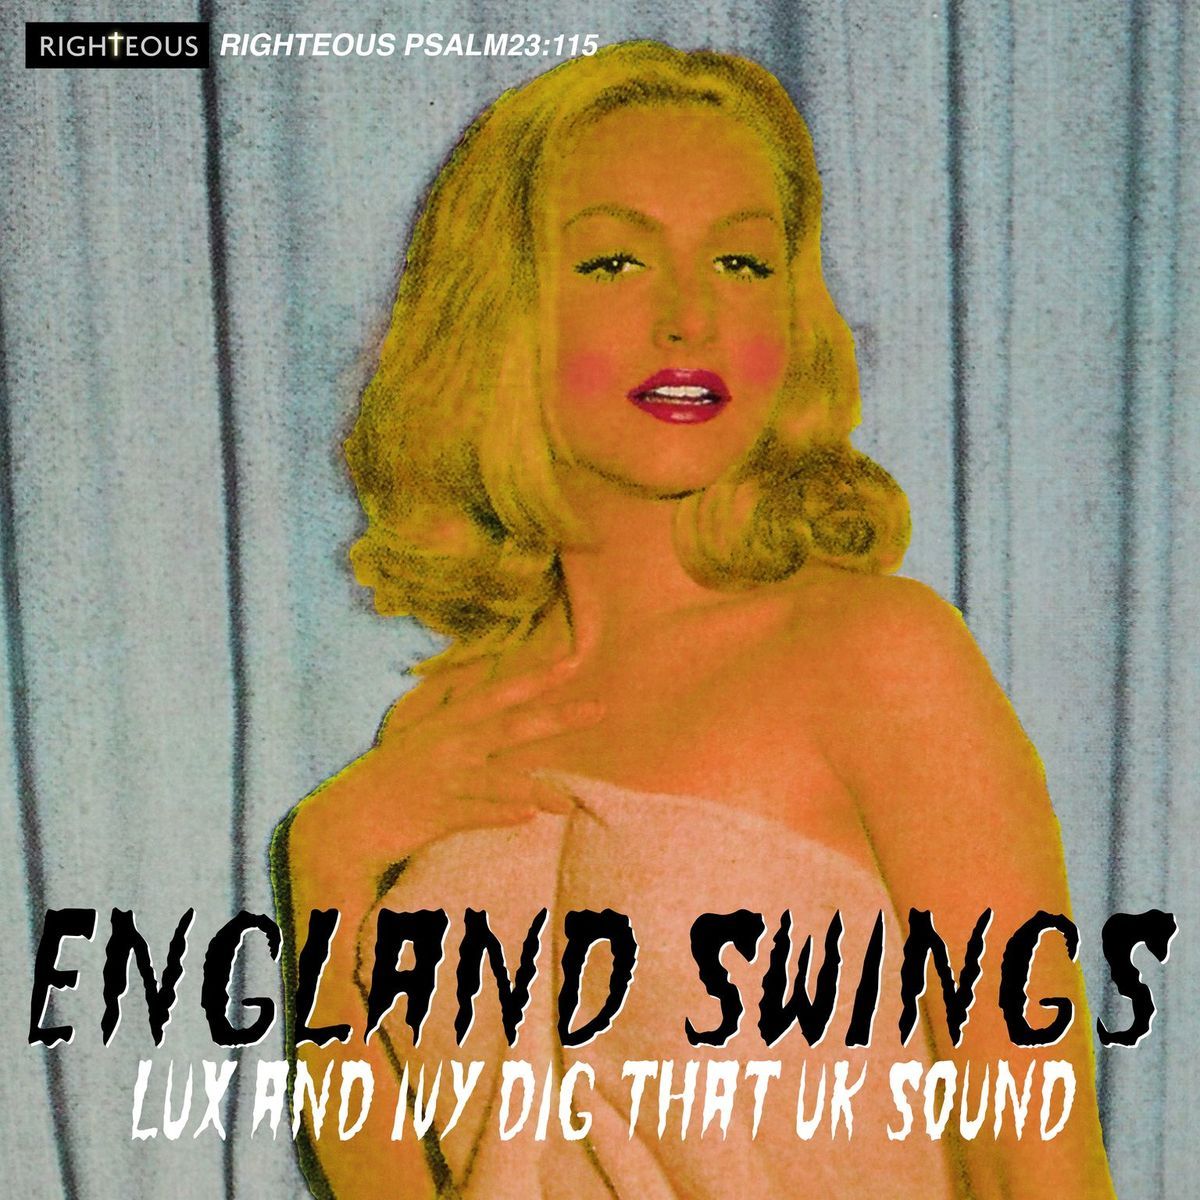 V.A. (OLDIES/50'S-60'S POP) / ENGLAND SWINGS - LUX AND IVY DIG THAT UK SOUND